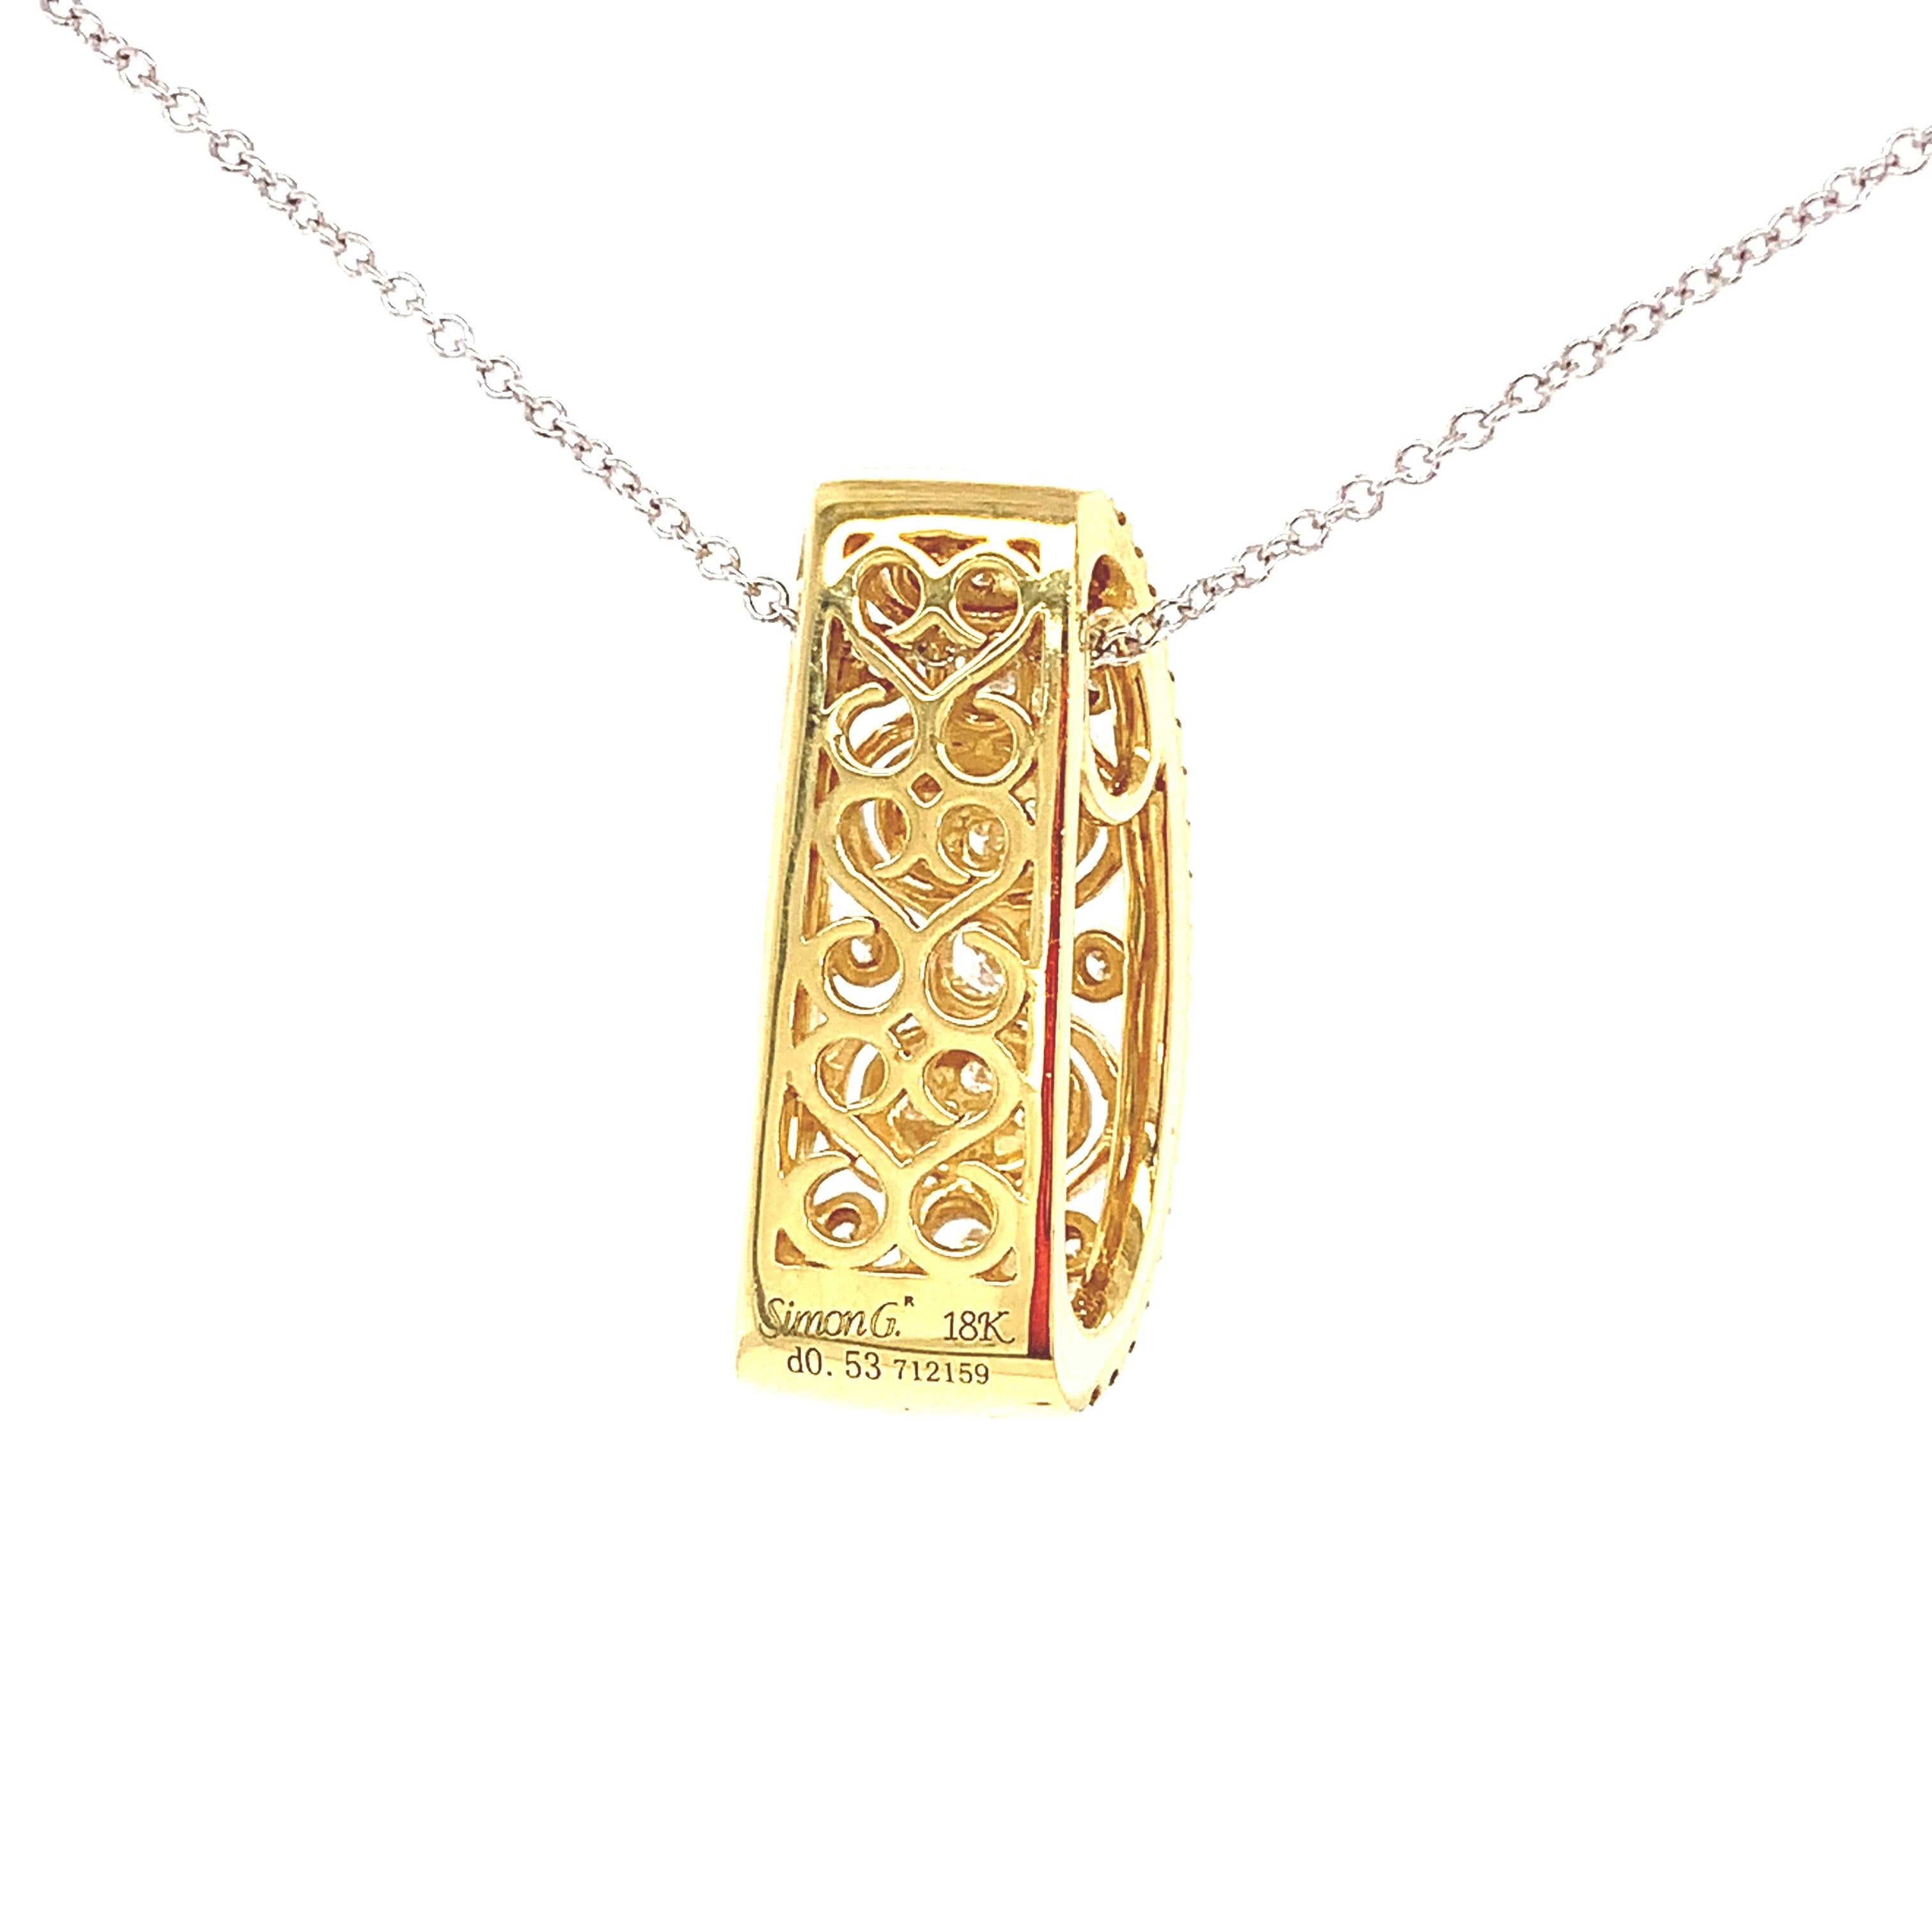 Simon G. Vintage Style Filigree Diamond Pendant Necklace in 18K Yellow Gold In New Condition For Sale In Lumberton, TX